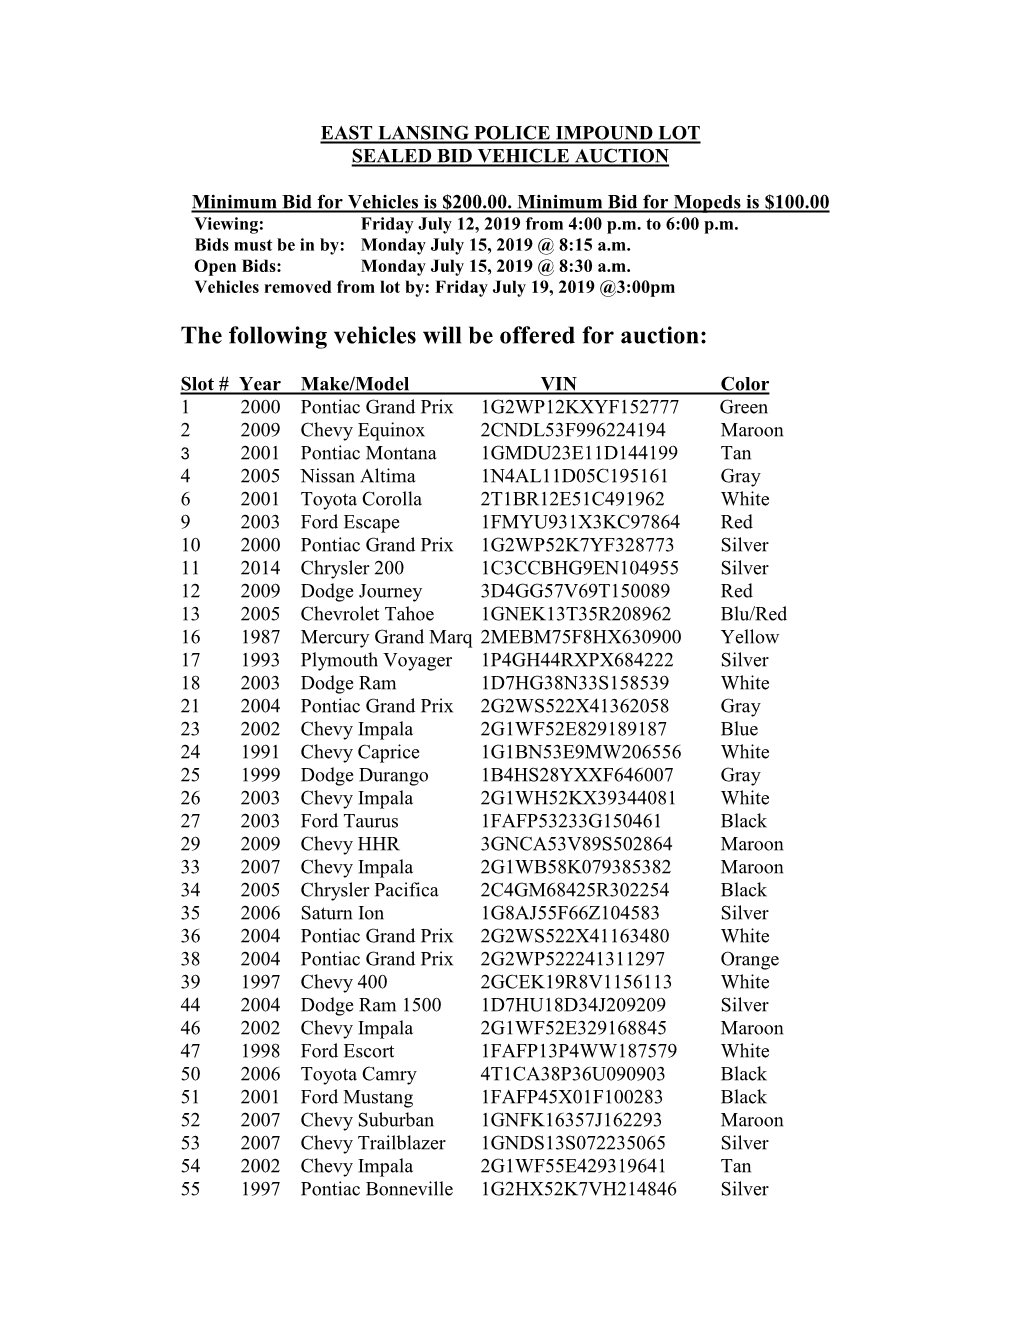 The Following Vehicles Will Be Offered for Auction